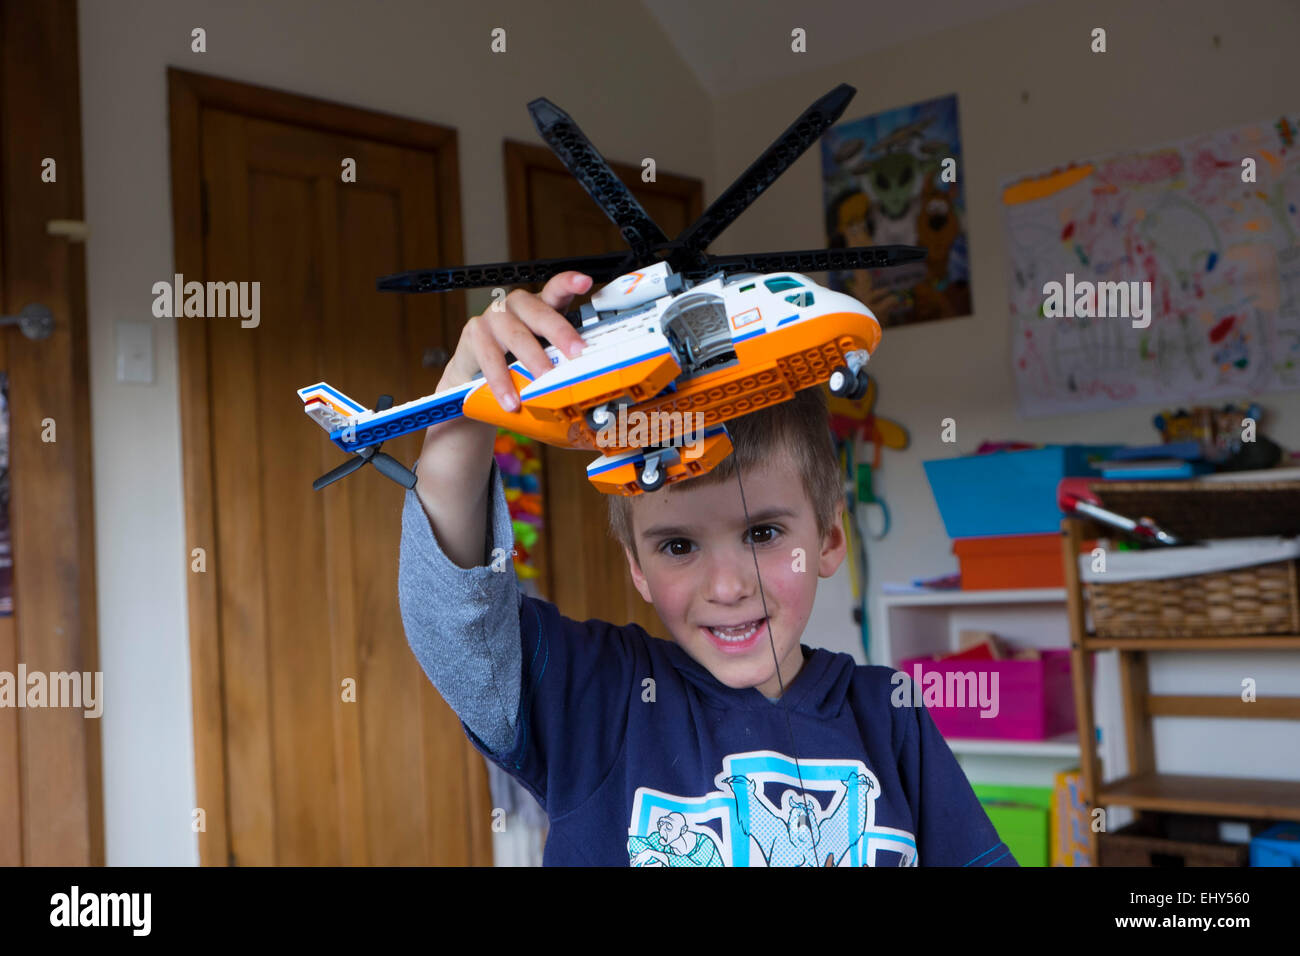 Boy aged four years playing with Lego building blocks helicopter, in bedroom Stock Photo